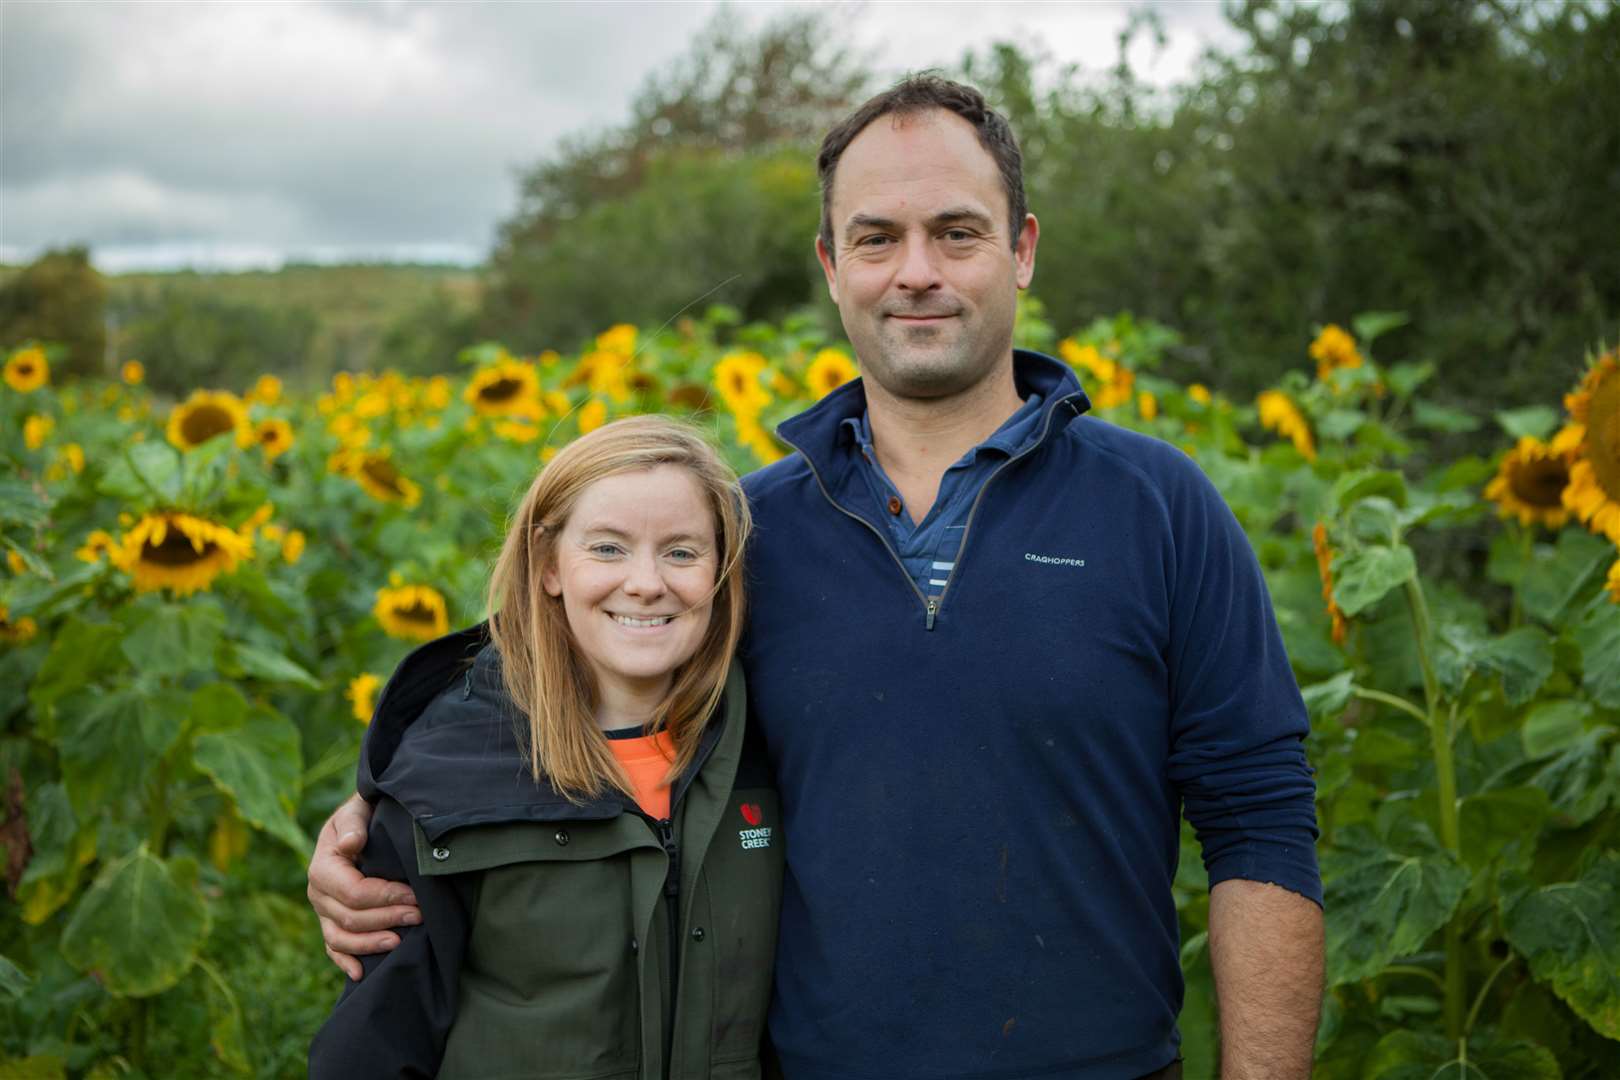 Barbara and David Girvan have just seen the end of sunflower season at their farm.